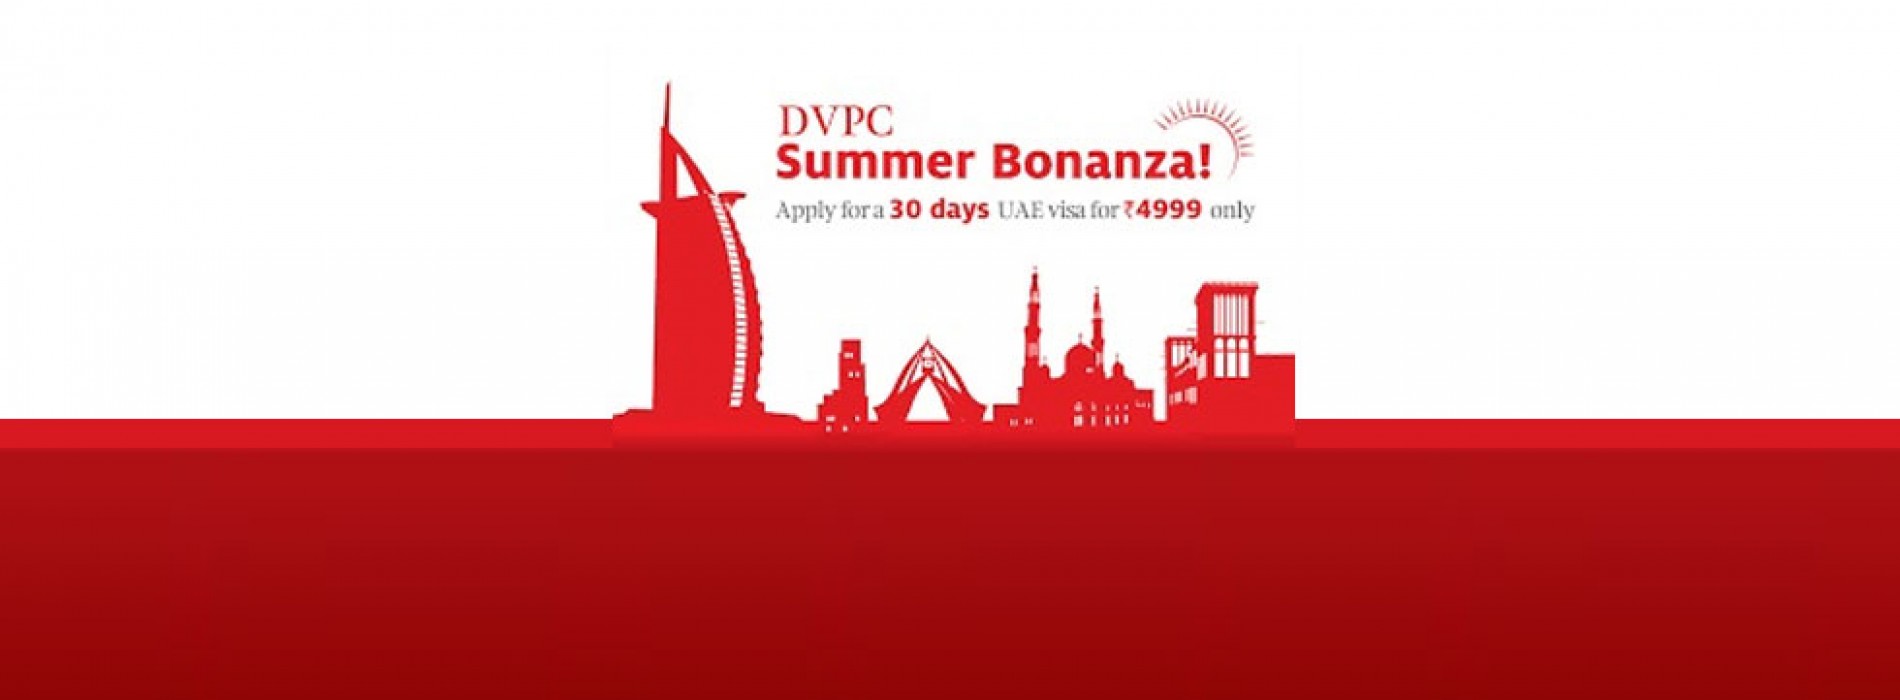 Make your summer break extra special with DVPC’s exciting new offer!